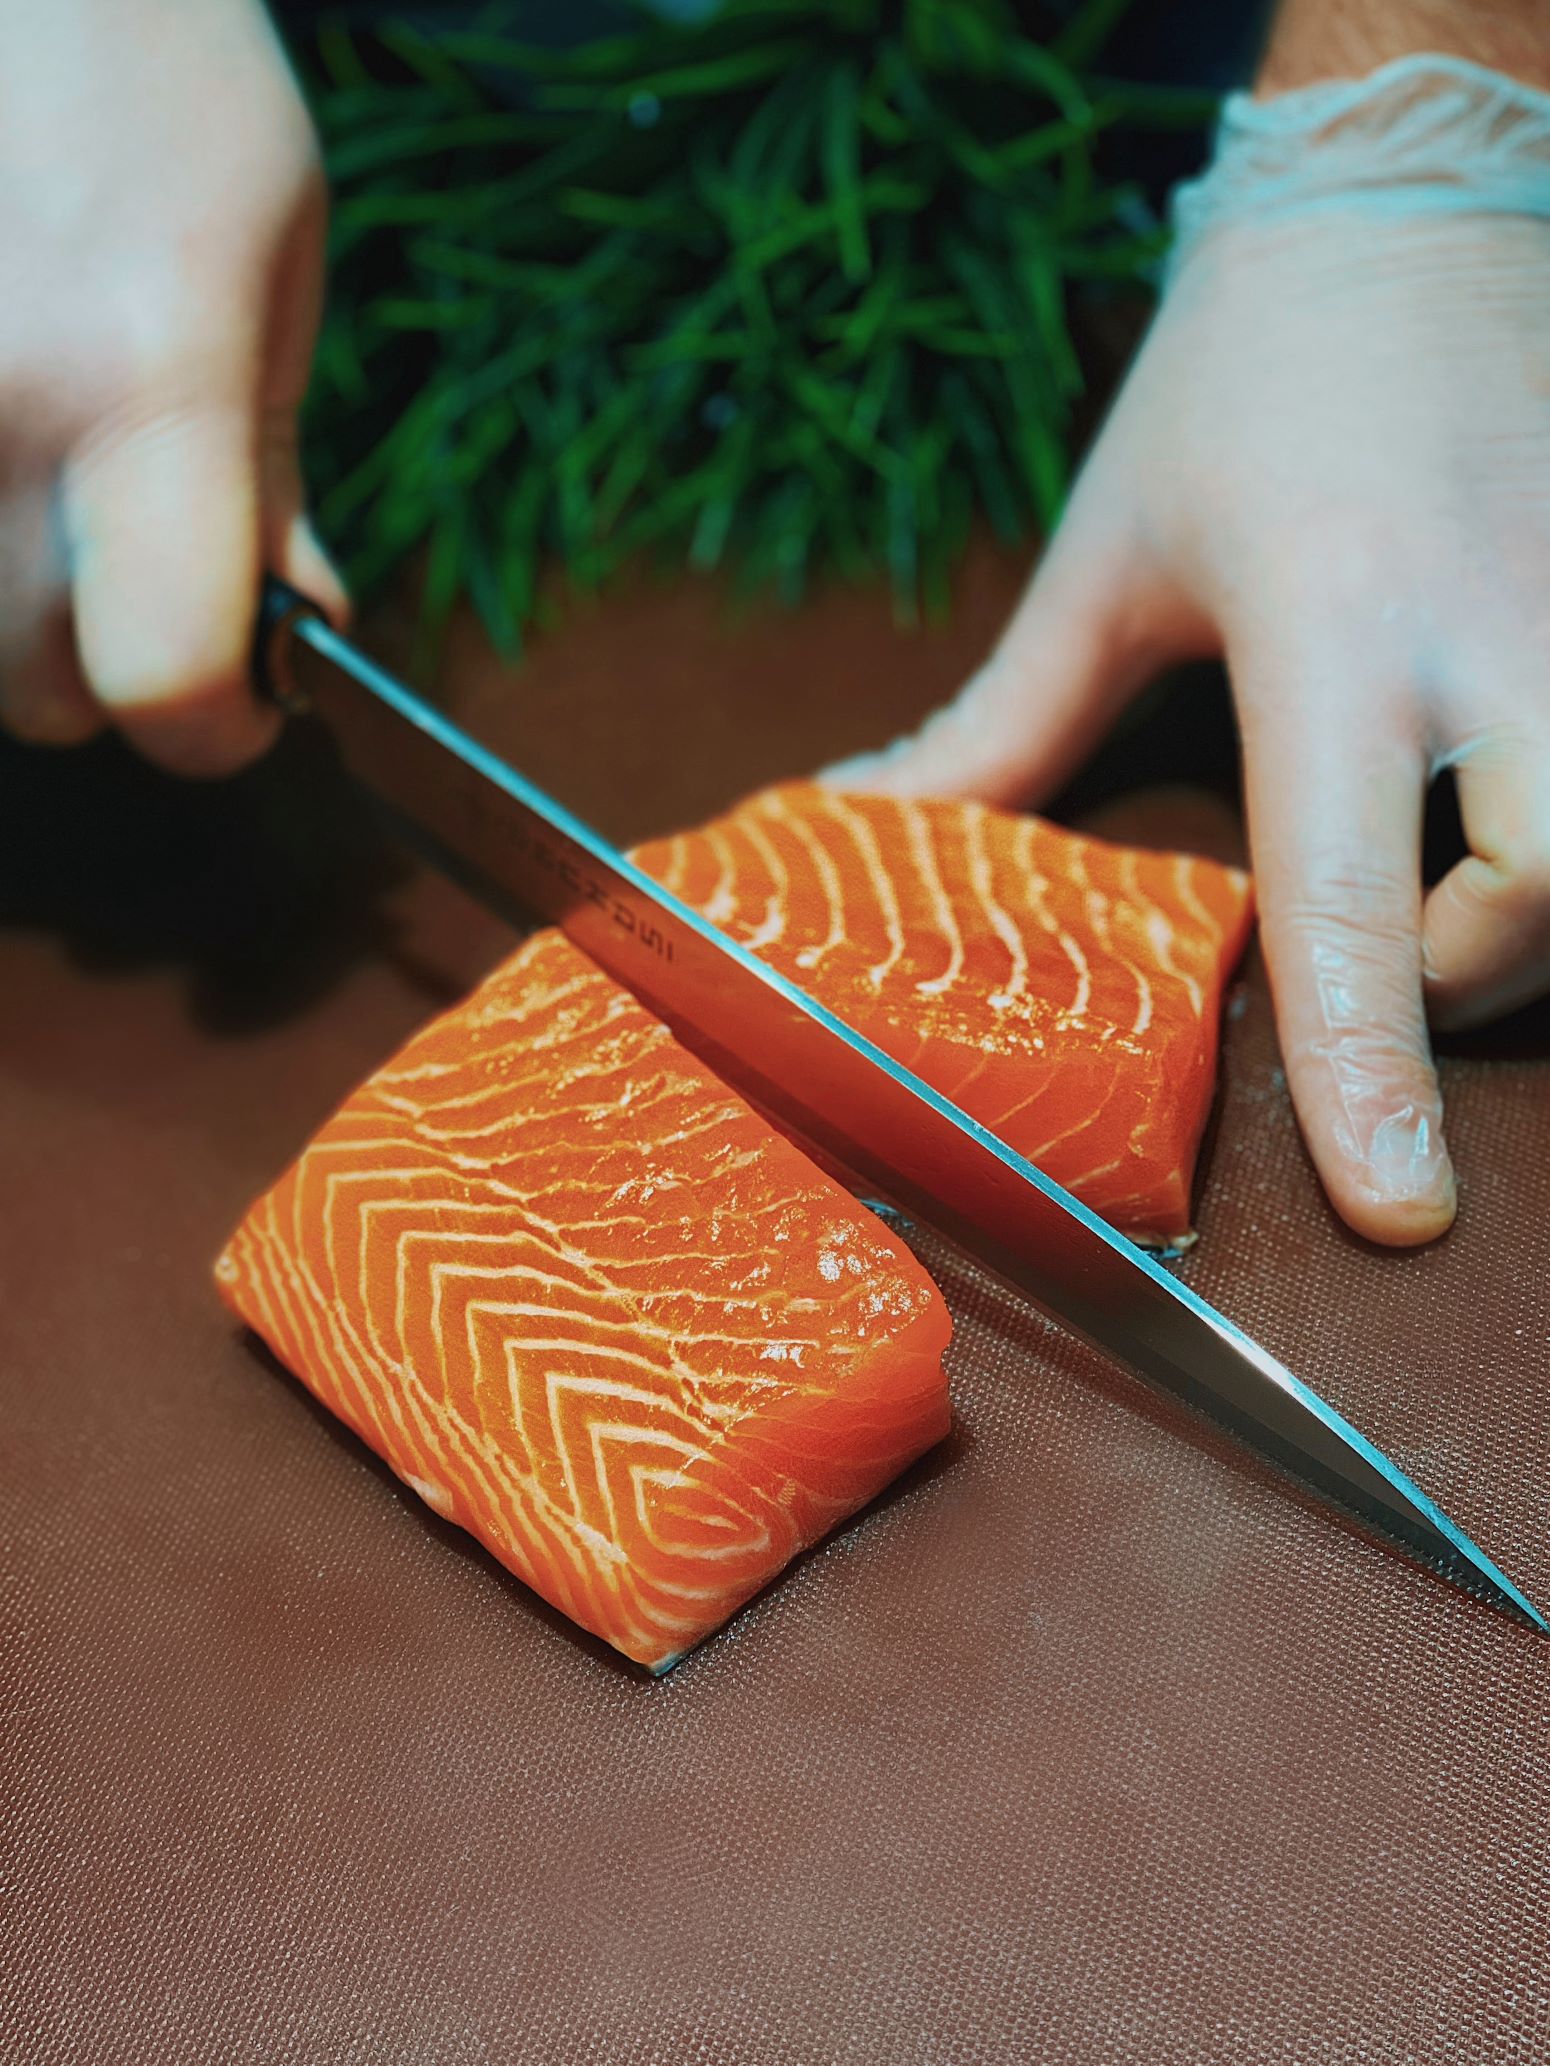 An image of someone cutting a piece of salmon.